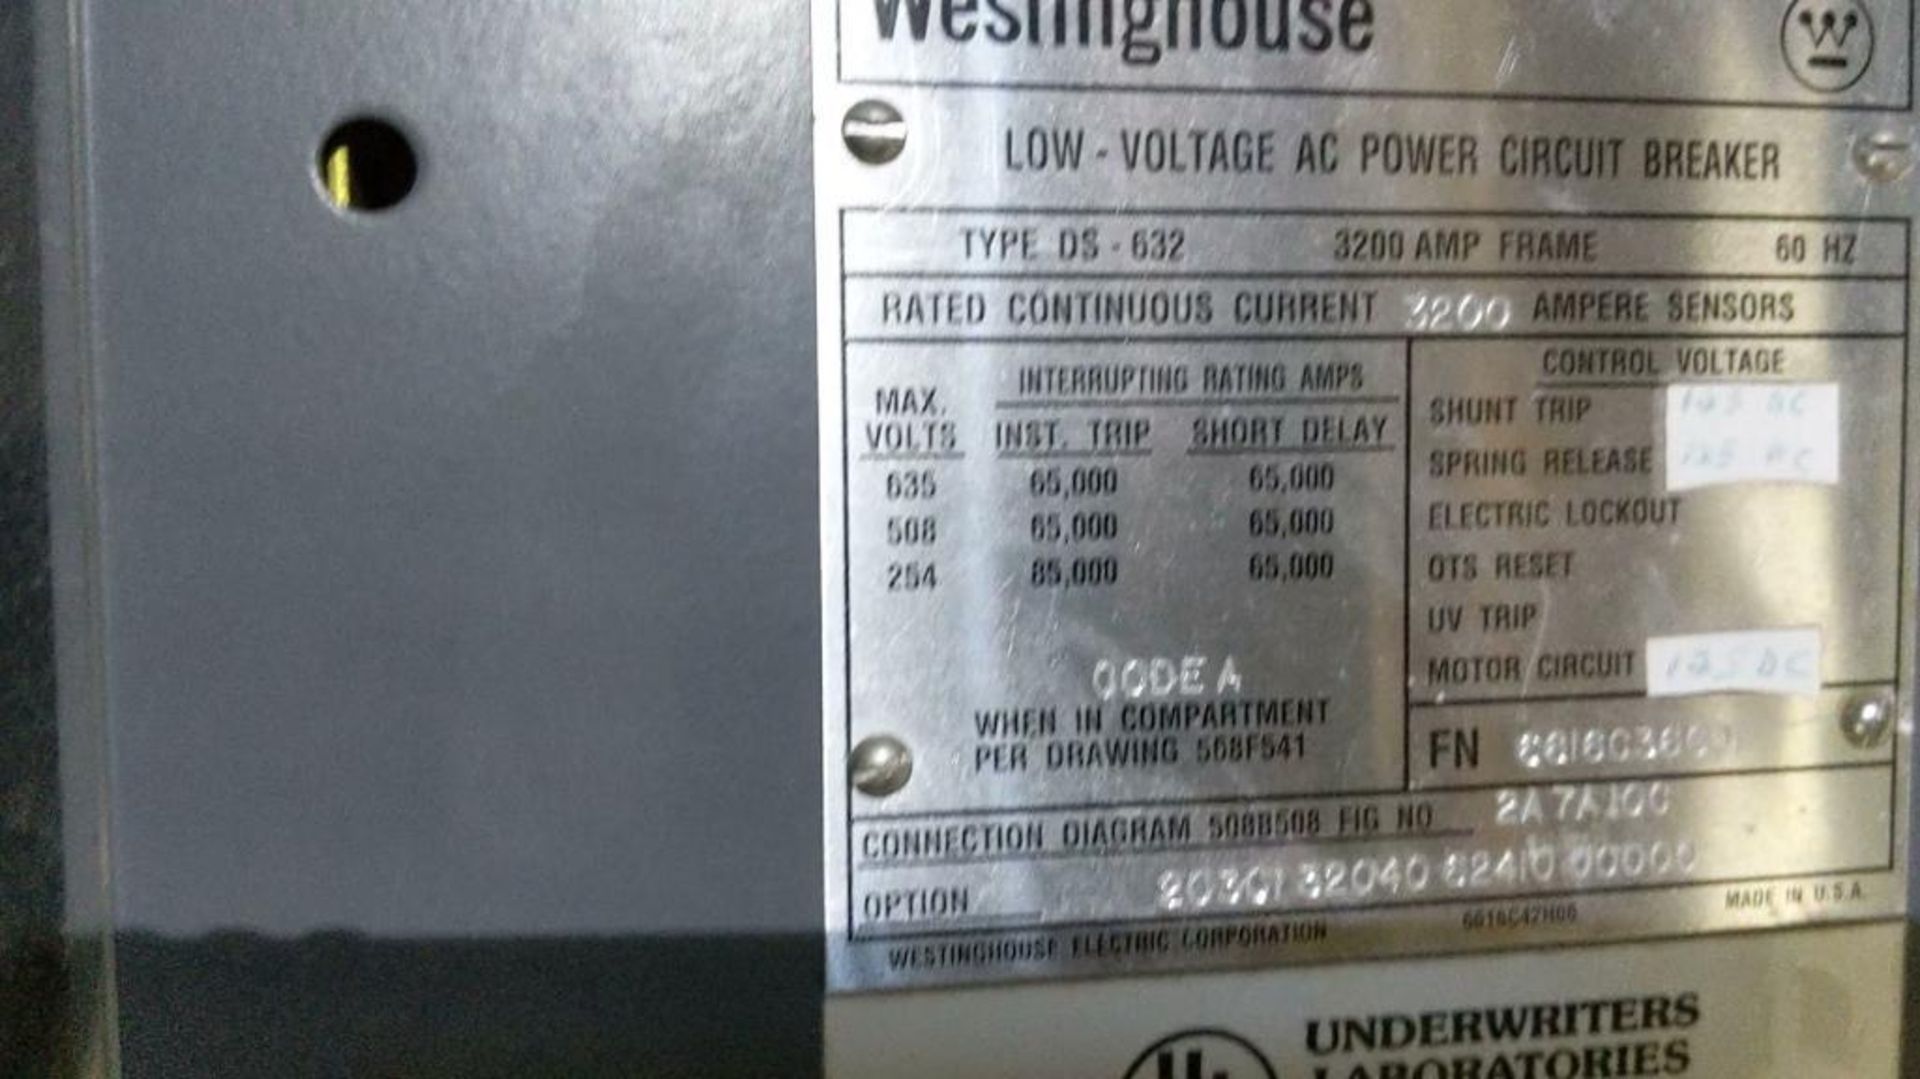 3,200 AMP WESTINGHOUSE CIRCUIT BREAKER (CABINET NOT INCLUDED), HIT # 3049 - Image 5 of 5